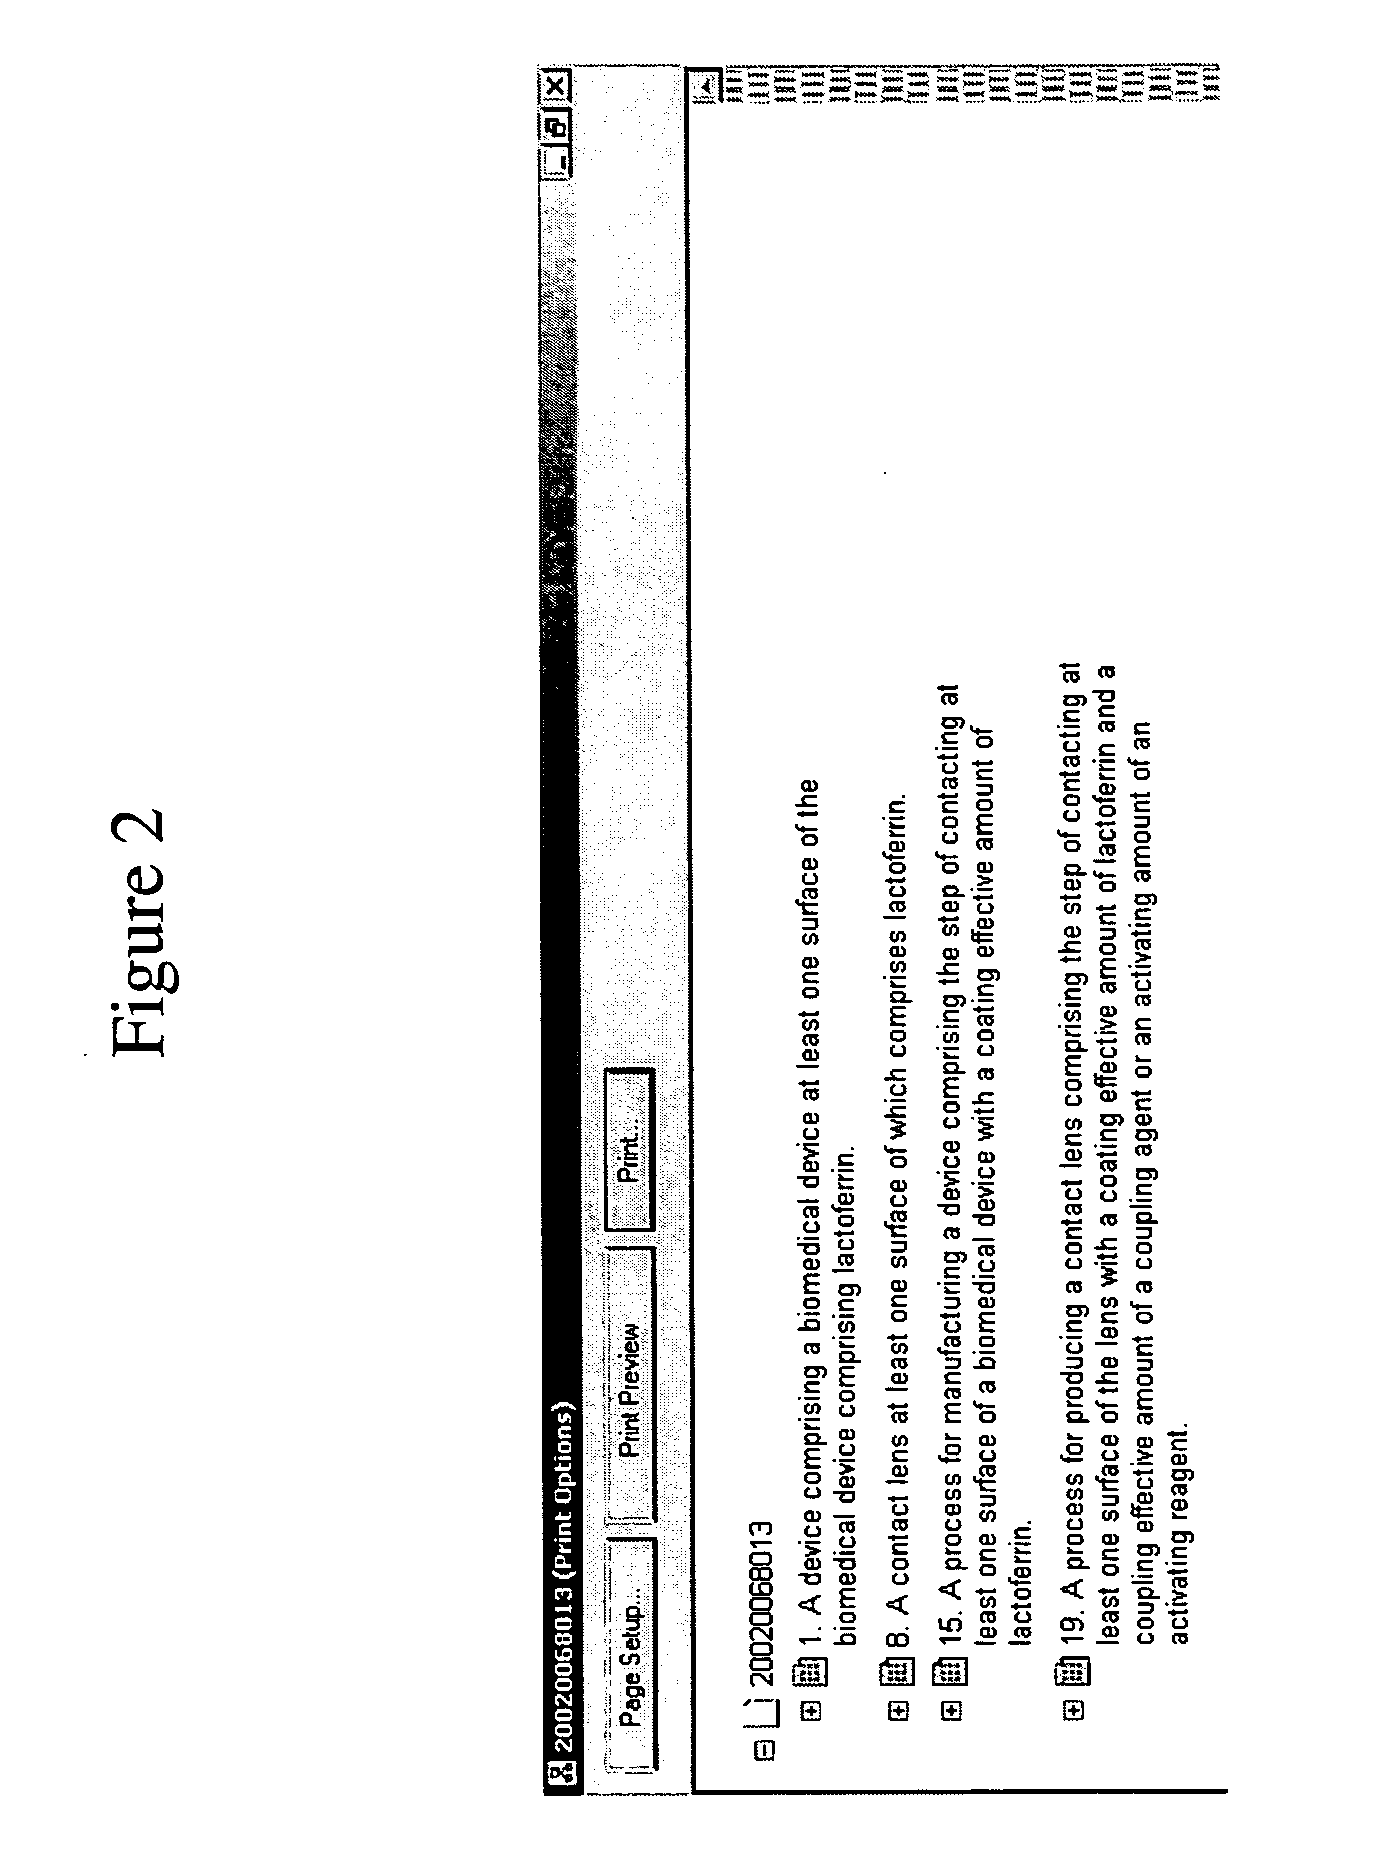 Patent claims analysis system and method